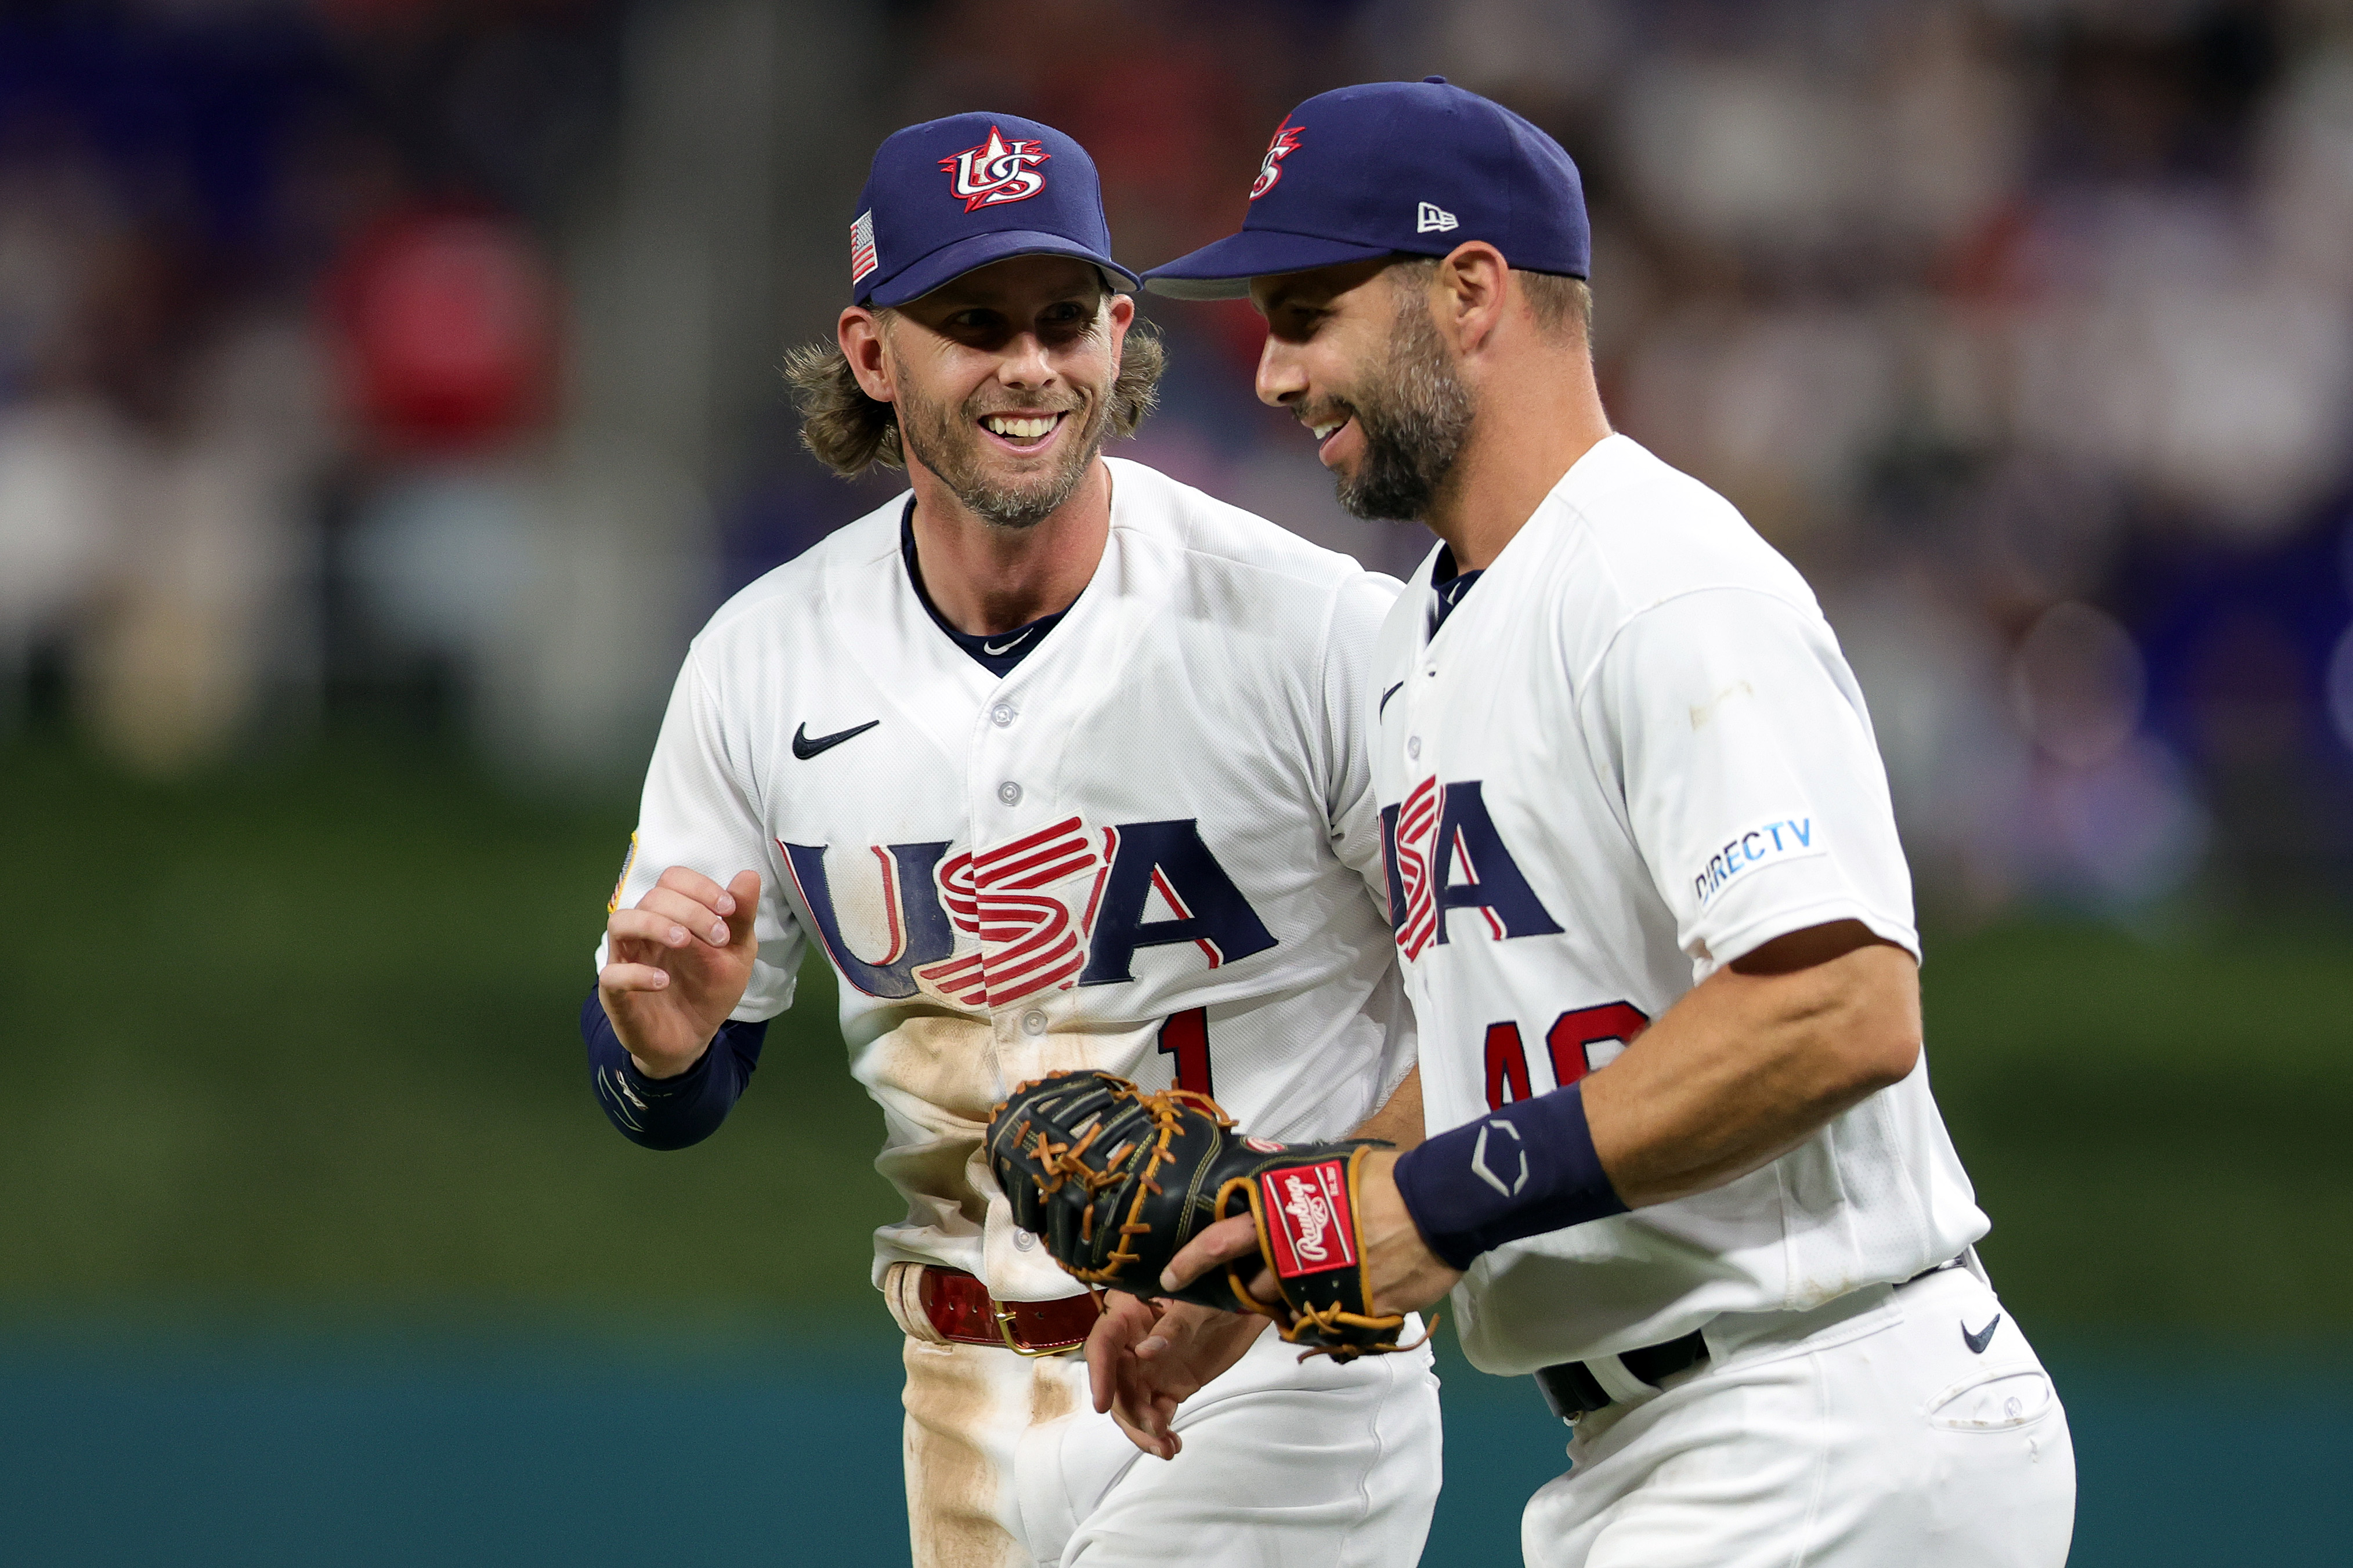 Jeff McNeil #1 speaks with Paul Goldschmidt #46 of Team USA after almost colliding while trying to make a catch against Team Cuba during the World Baseball Classic Semifinals at loanDepot park on March 19, 2023 in Miami, Florida.